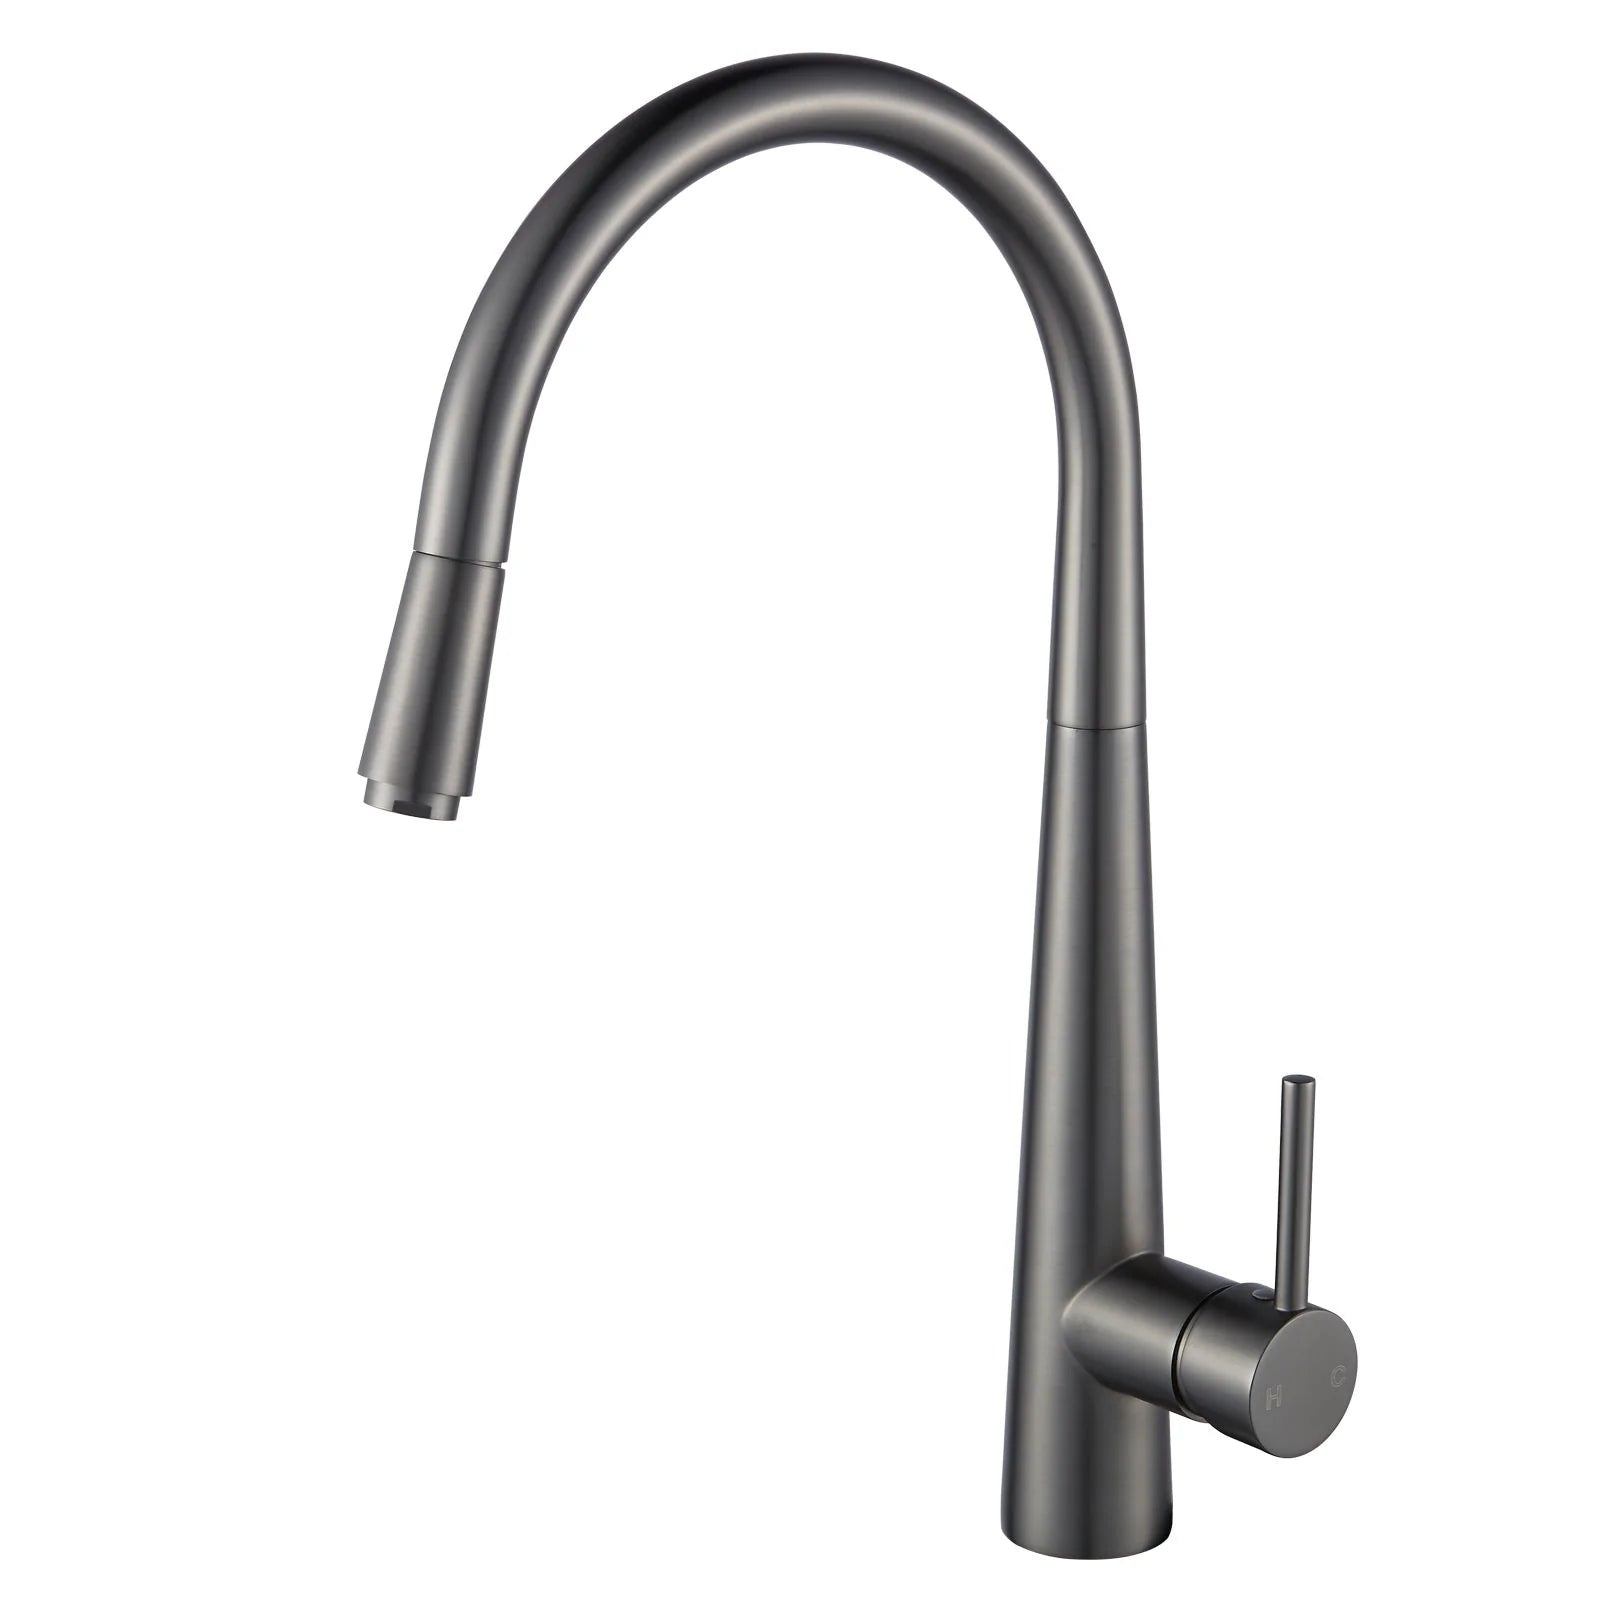 Round Pull Out Kitchen Sink Mixer Tap: Convenient and versatile addition to your kitchen-GM1021.KM